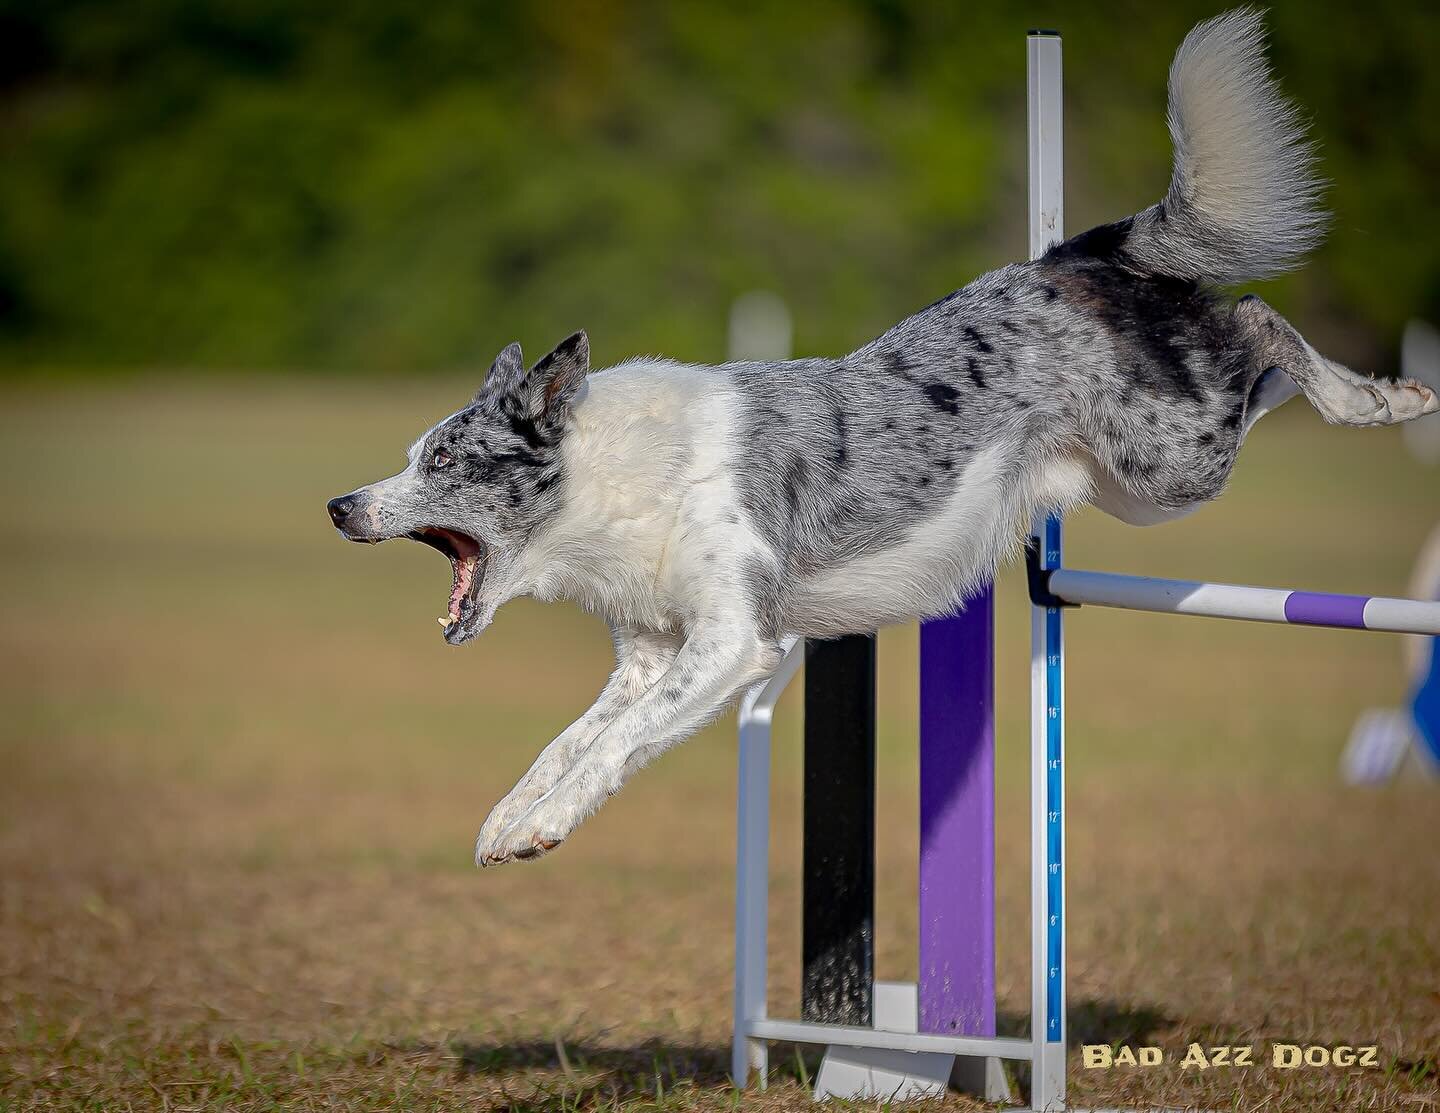 💙 Savage 💙

🏆 2024 UKI SE CUP 22&rdquo; Overall Champion 
🏆 22&rdquo; Overall Biathlon Champion 

Thanks so much to @badazzdogz for these truly bad ass photos of my crazy, insanely loud blue boy 💙